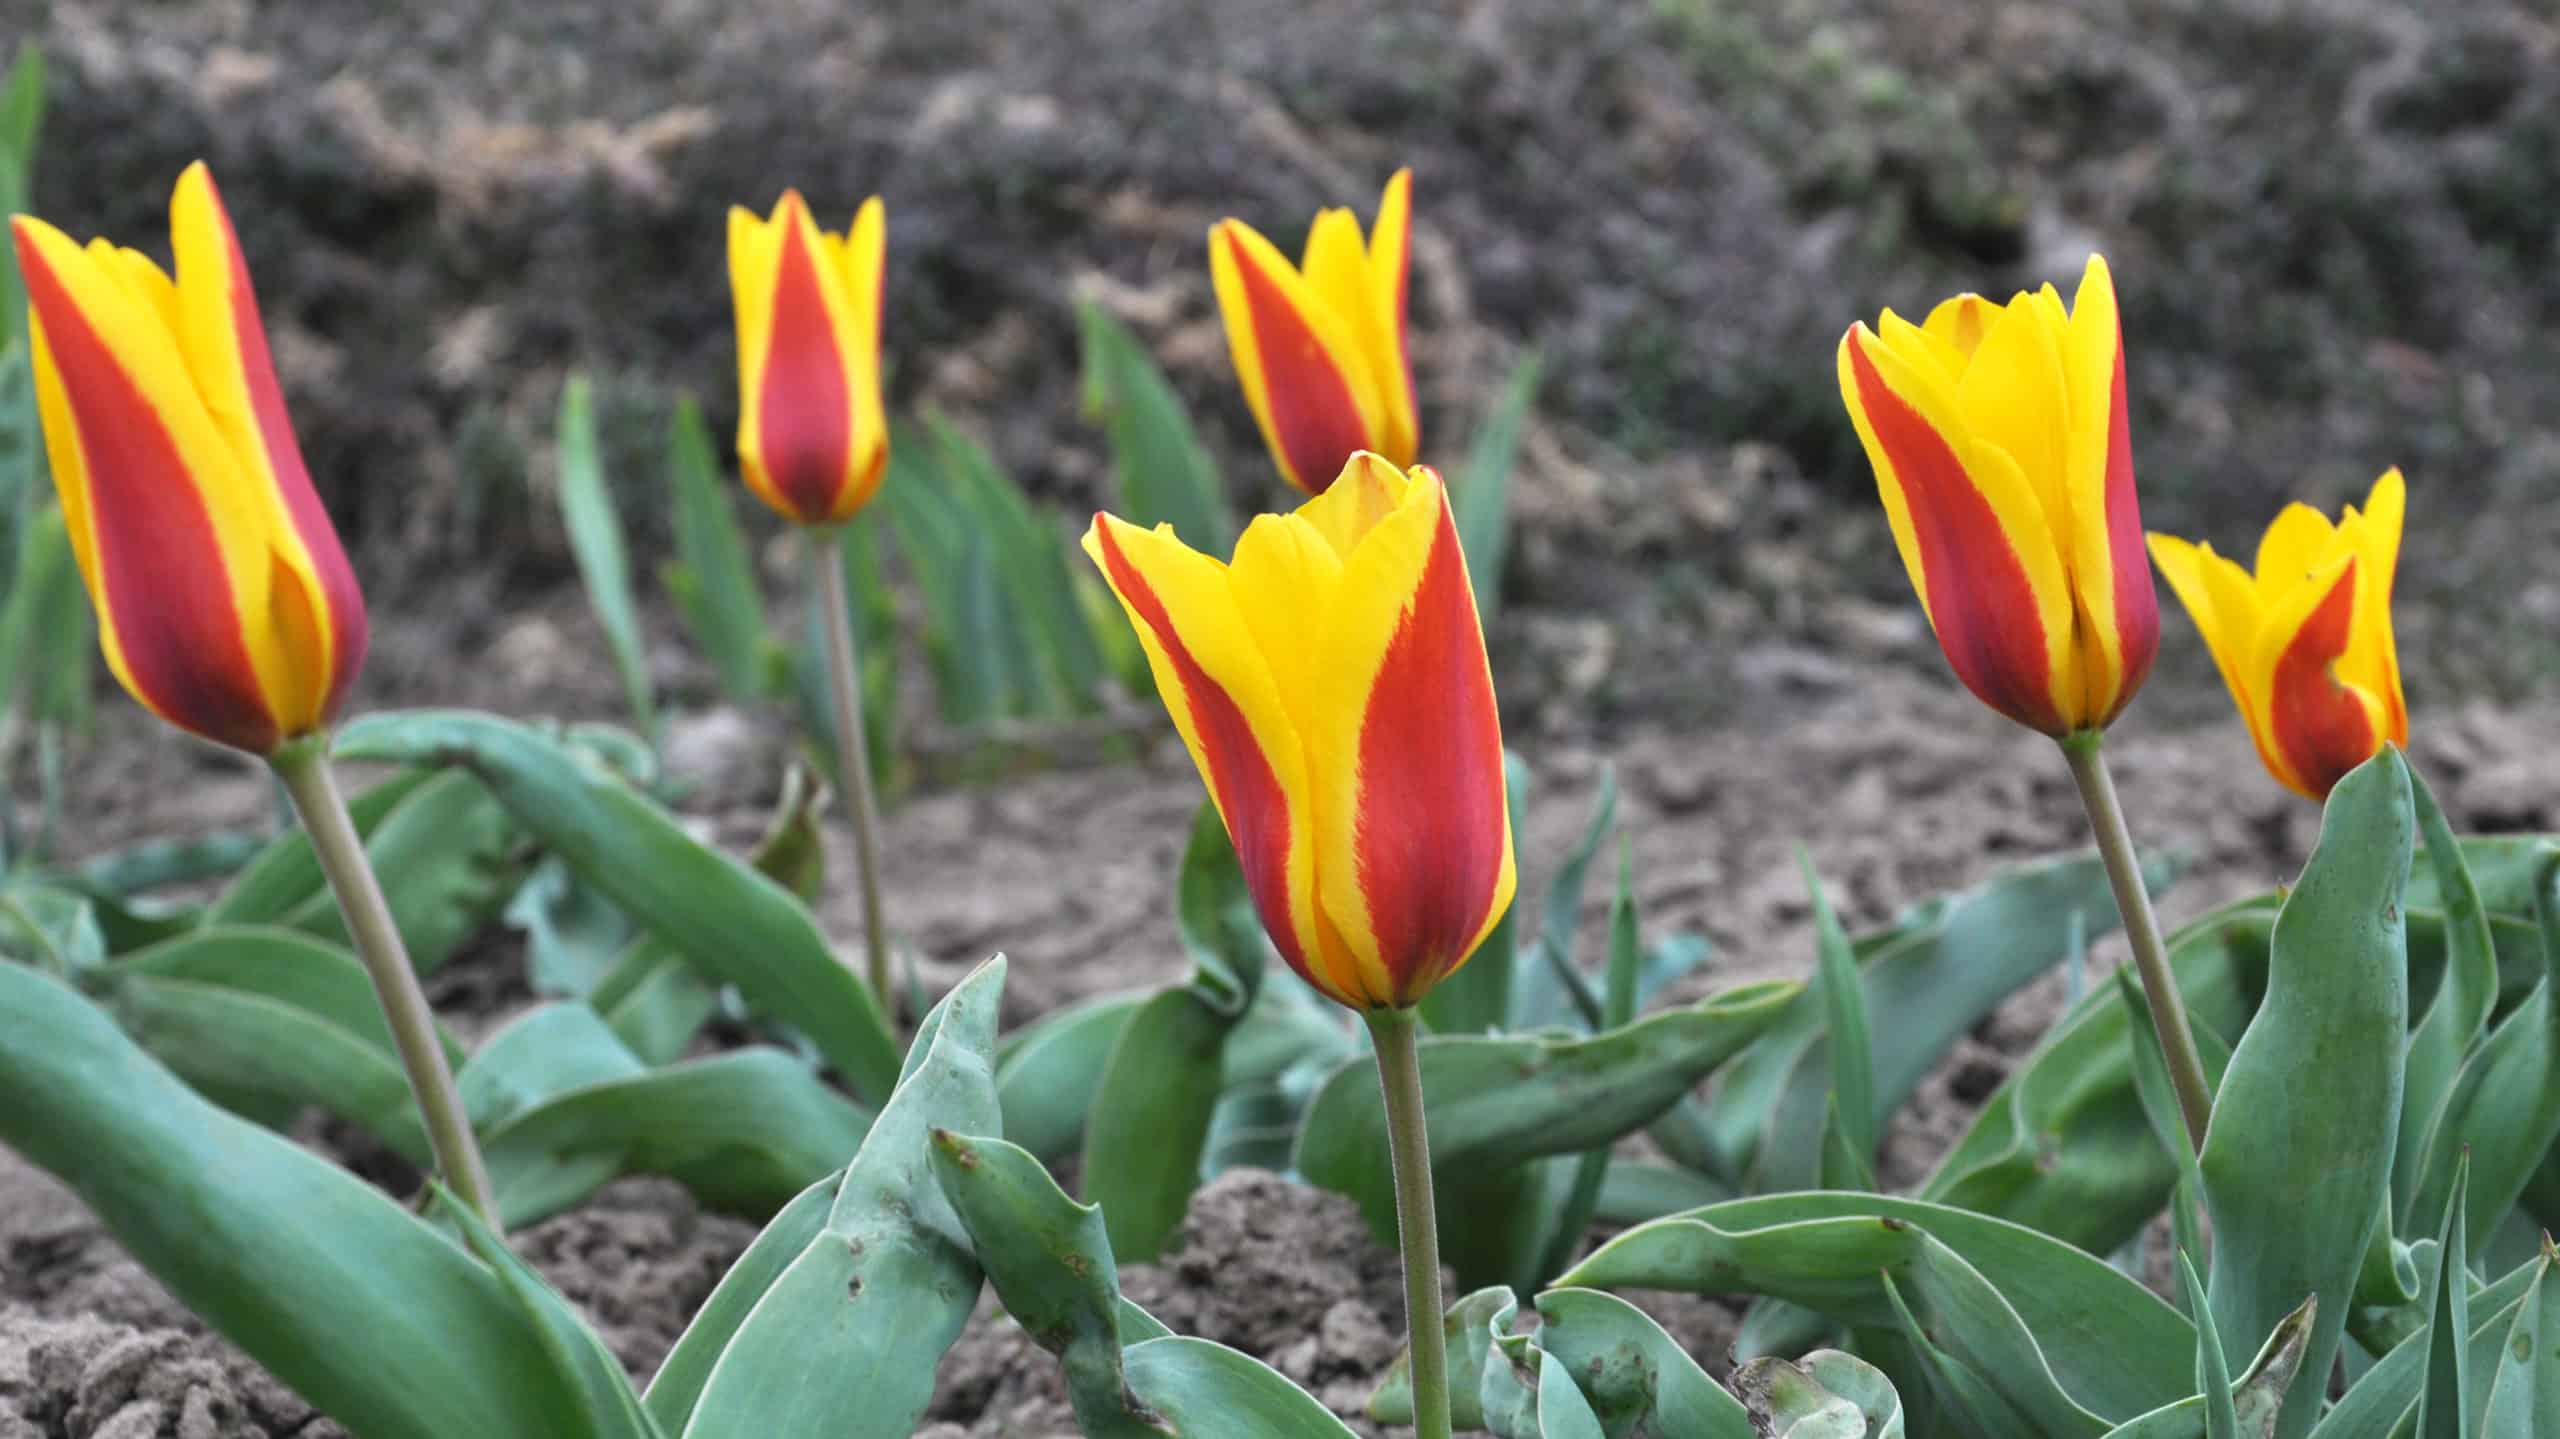 Red and yellow kaufmanniana tulips in bloom